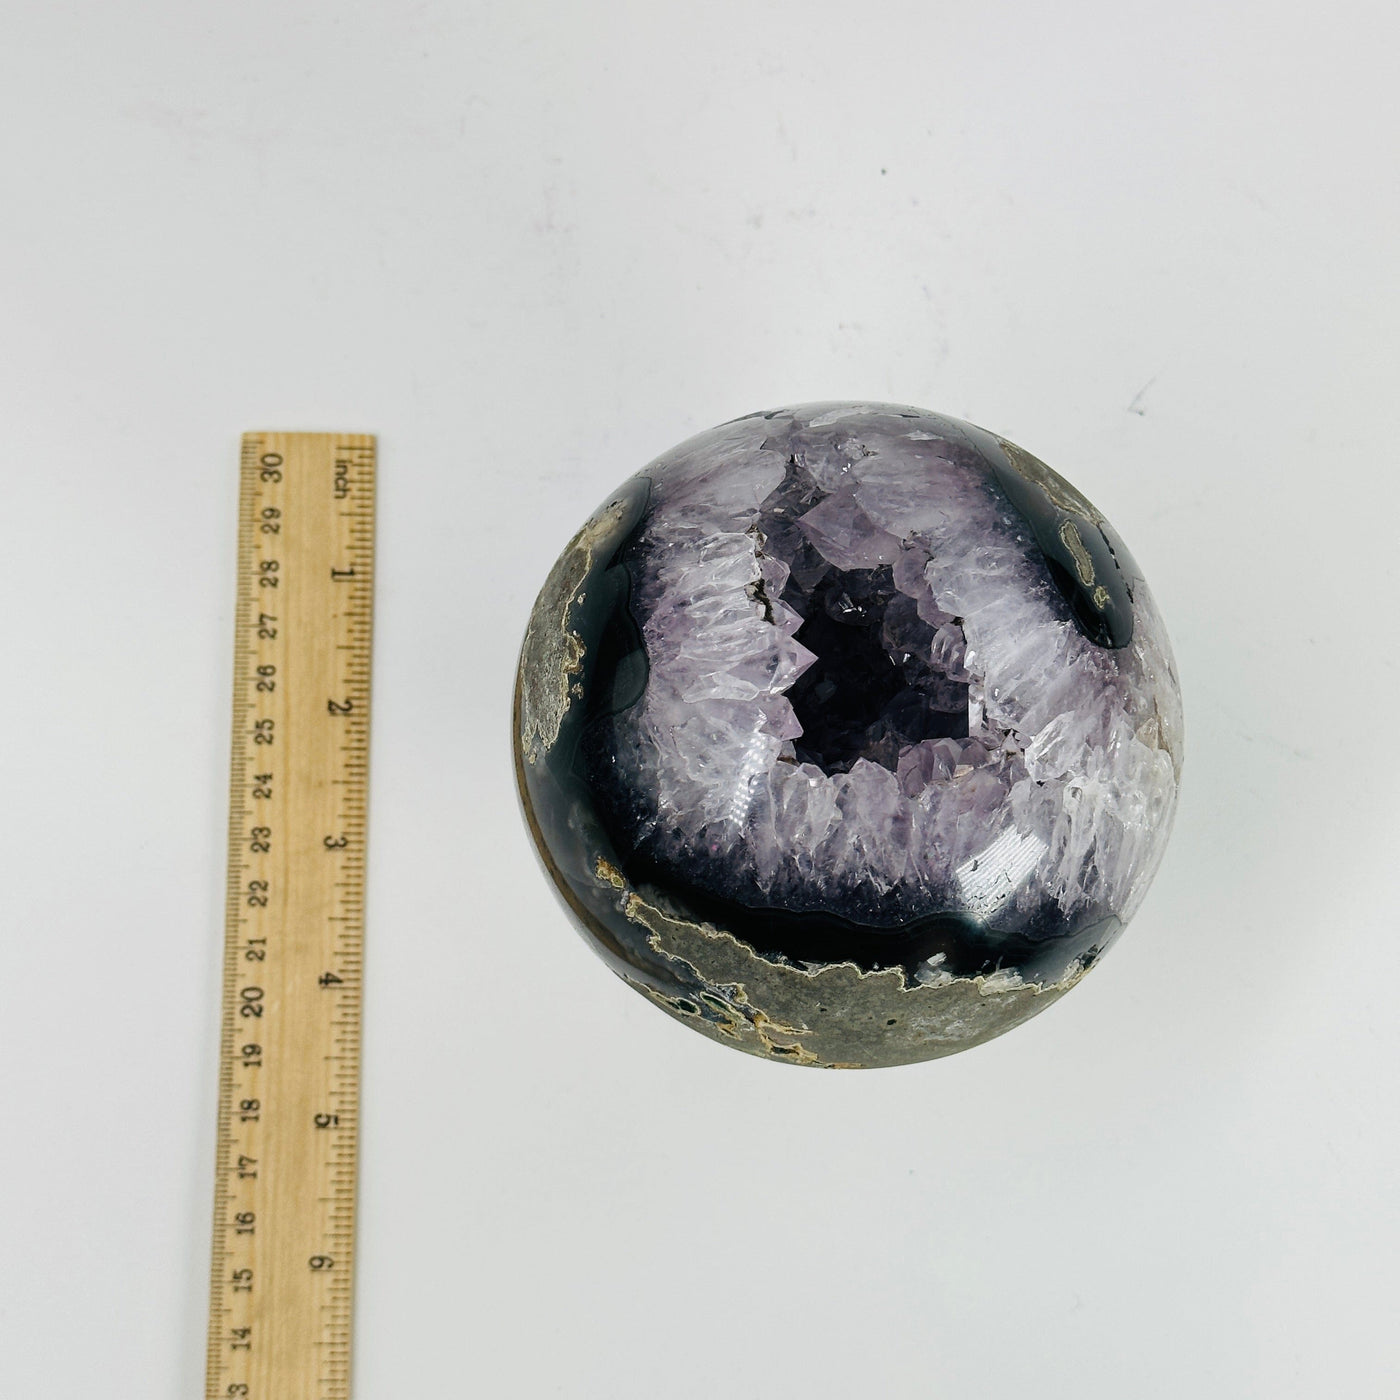 amethyst sphere next to a ruler for size referece